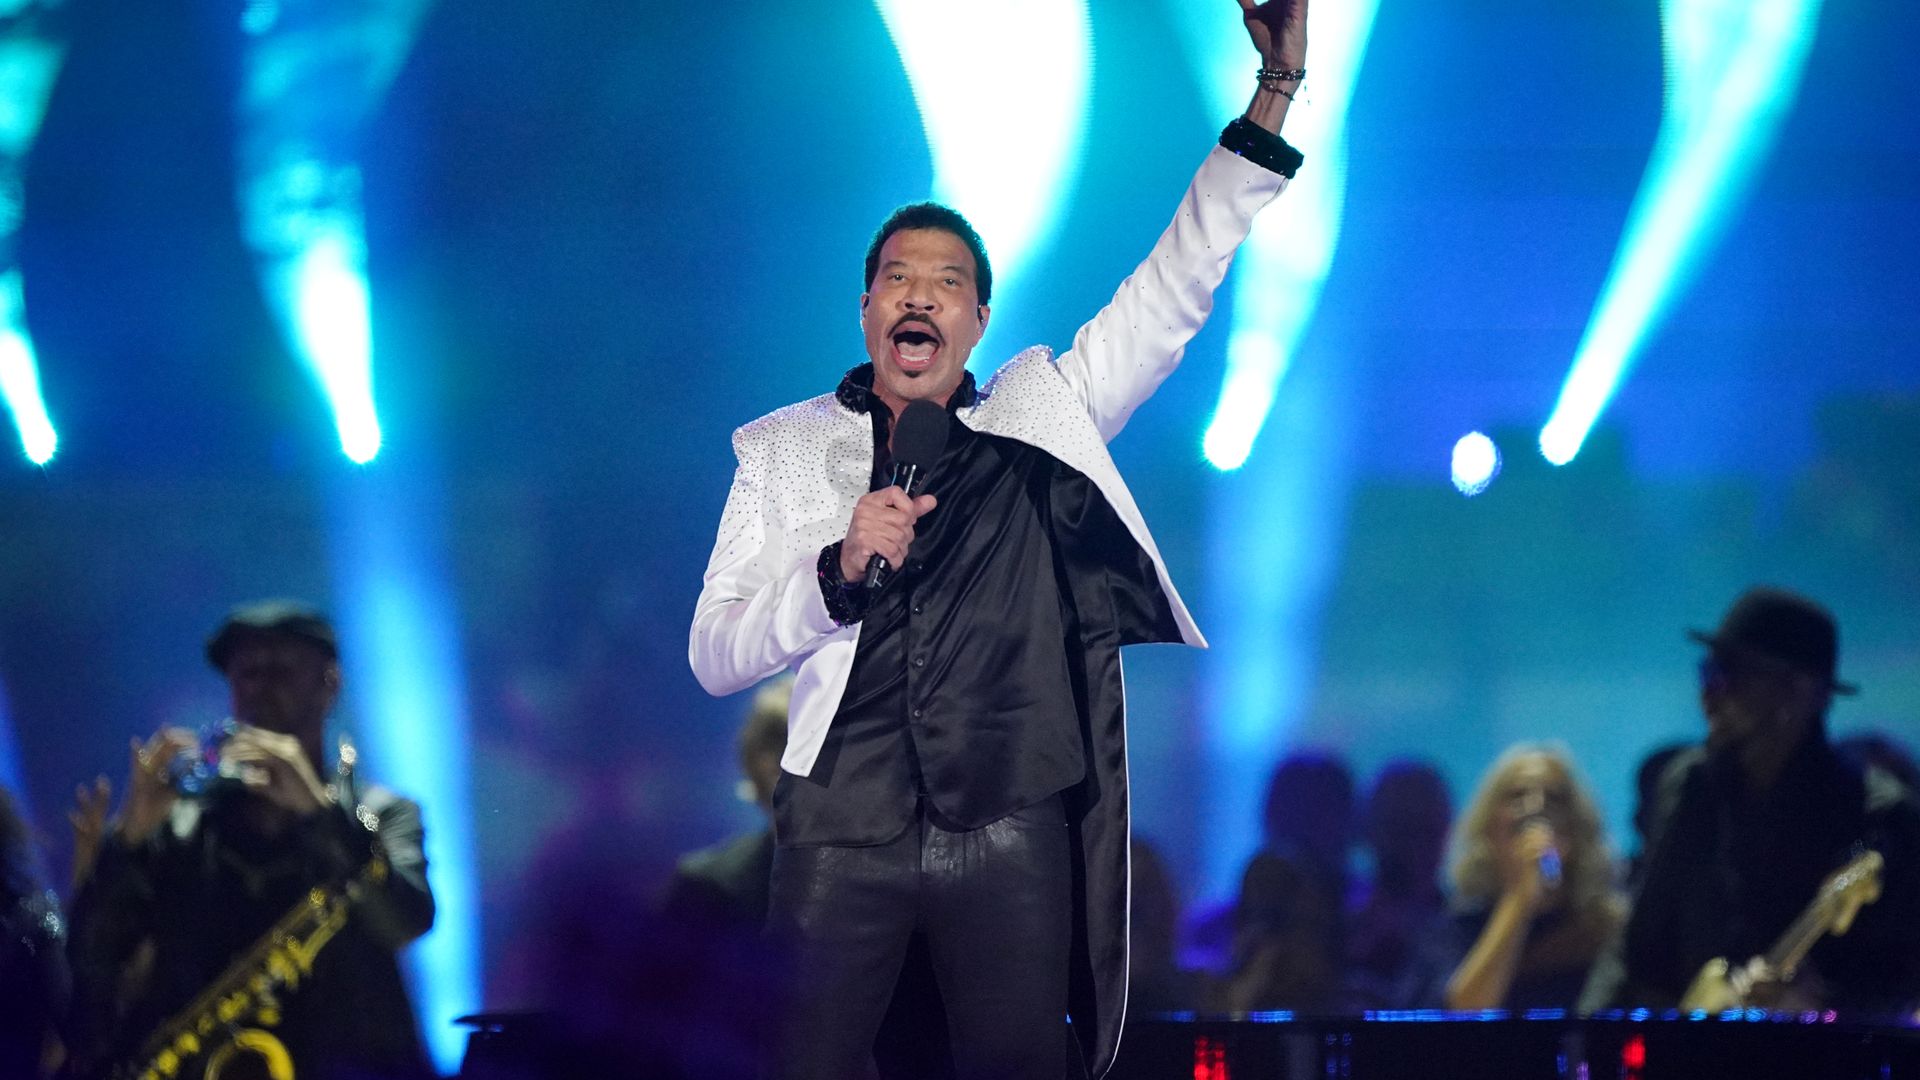 Lionel Richie performs during the Coronation Concert 